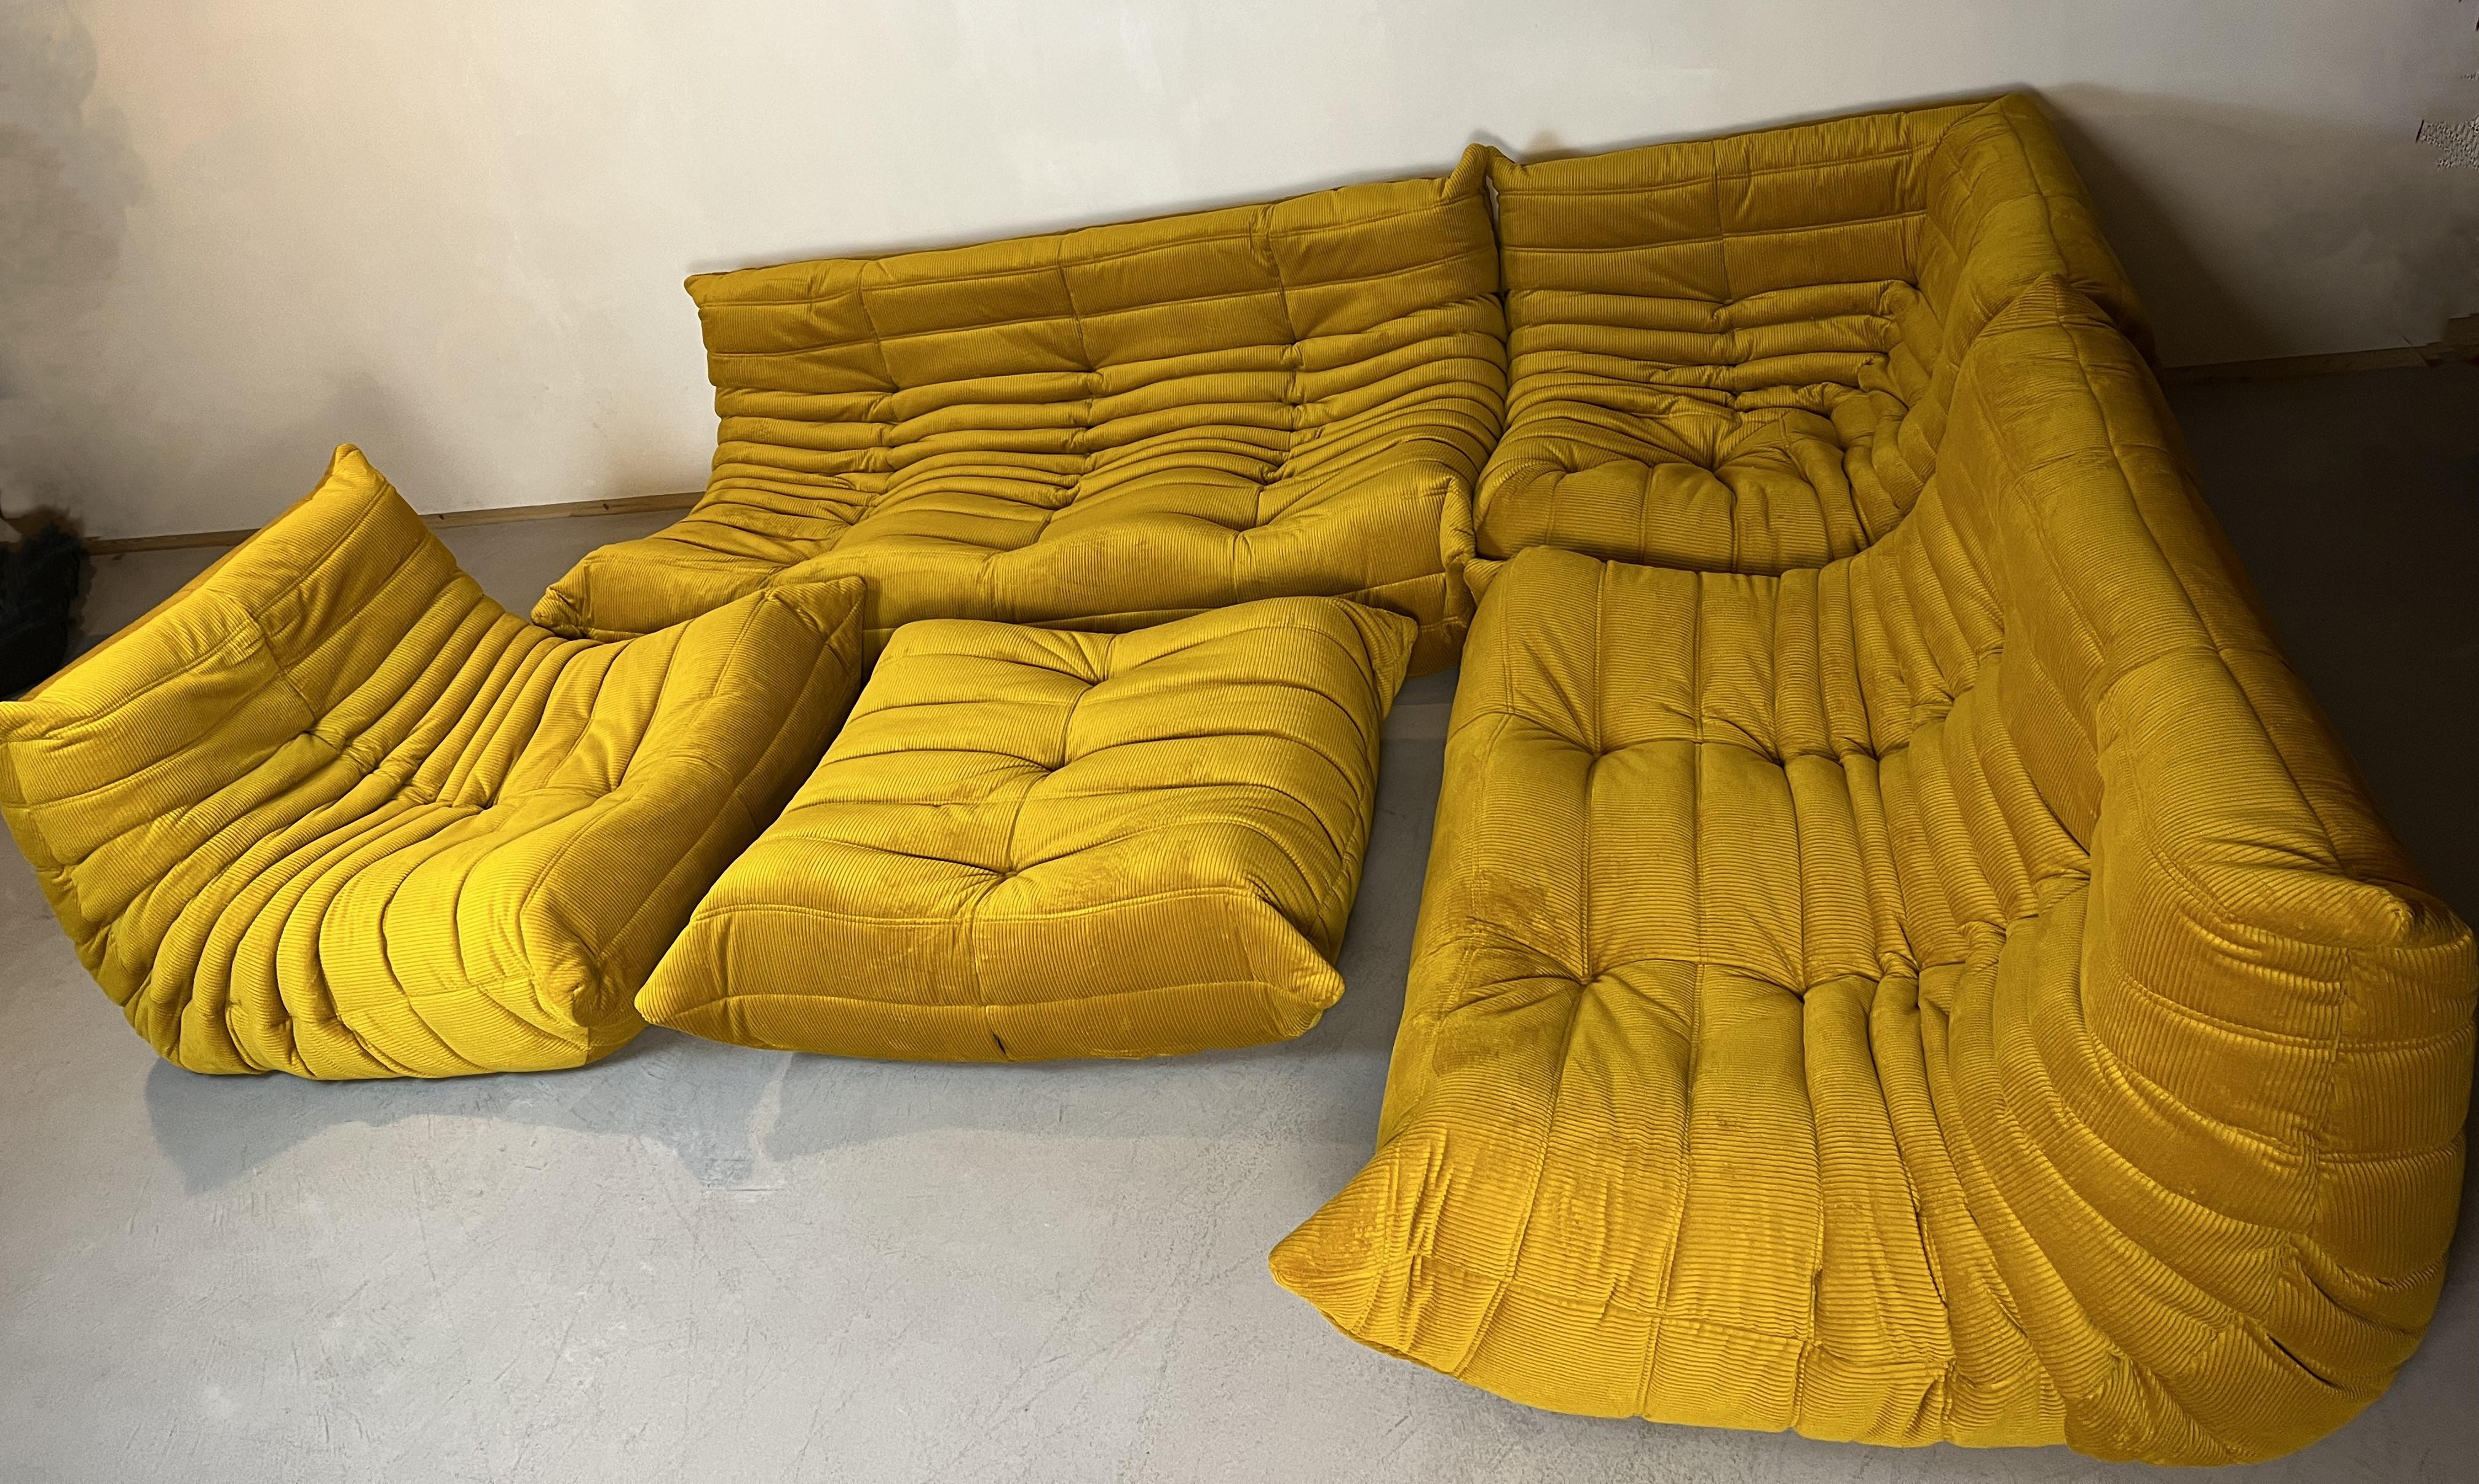 Togo sofa by Michel Ducaroy for Ligne Roset. 5 pieces set
Togo was designed in 1973.
Five pieces set: three seater, twoseater, one seater, corner and pouf.
The sofa is upholstered with yellow fabric.
the set is very versatile, hte pieces can be